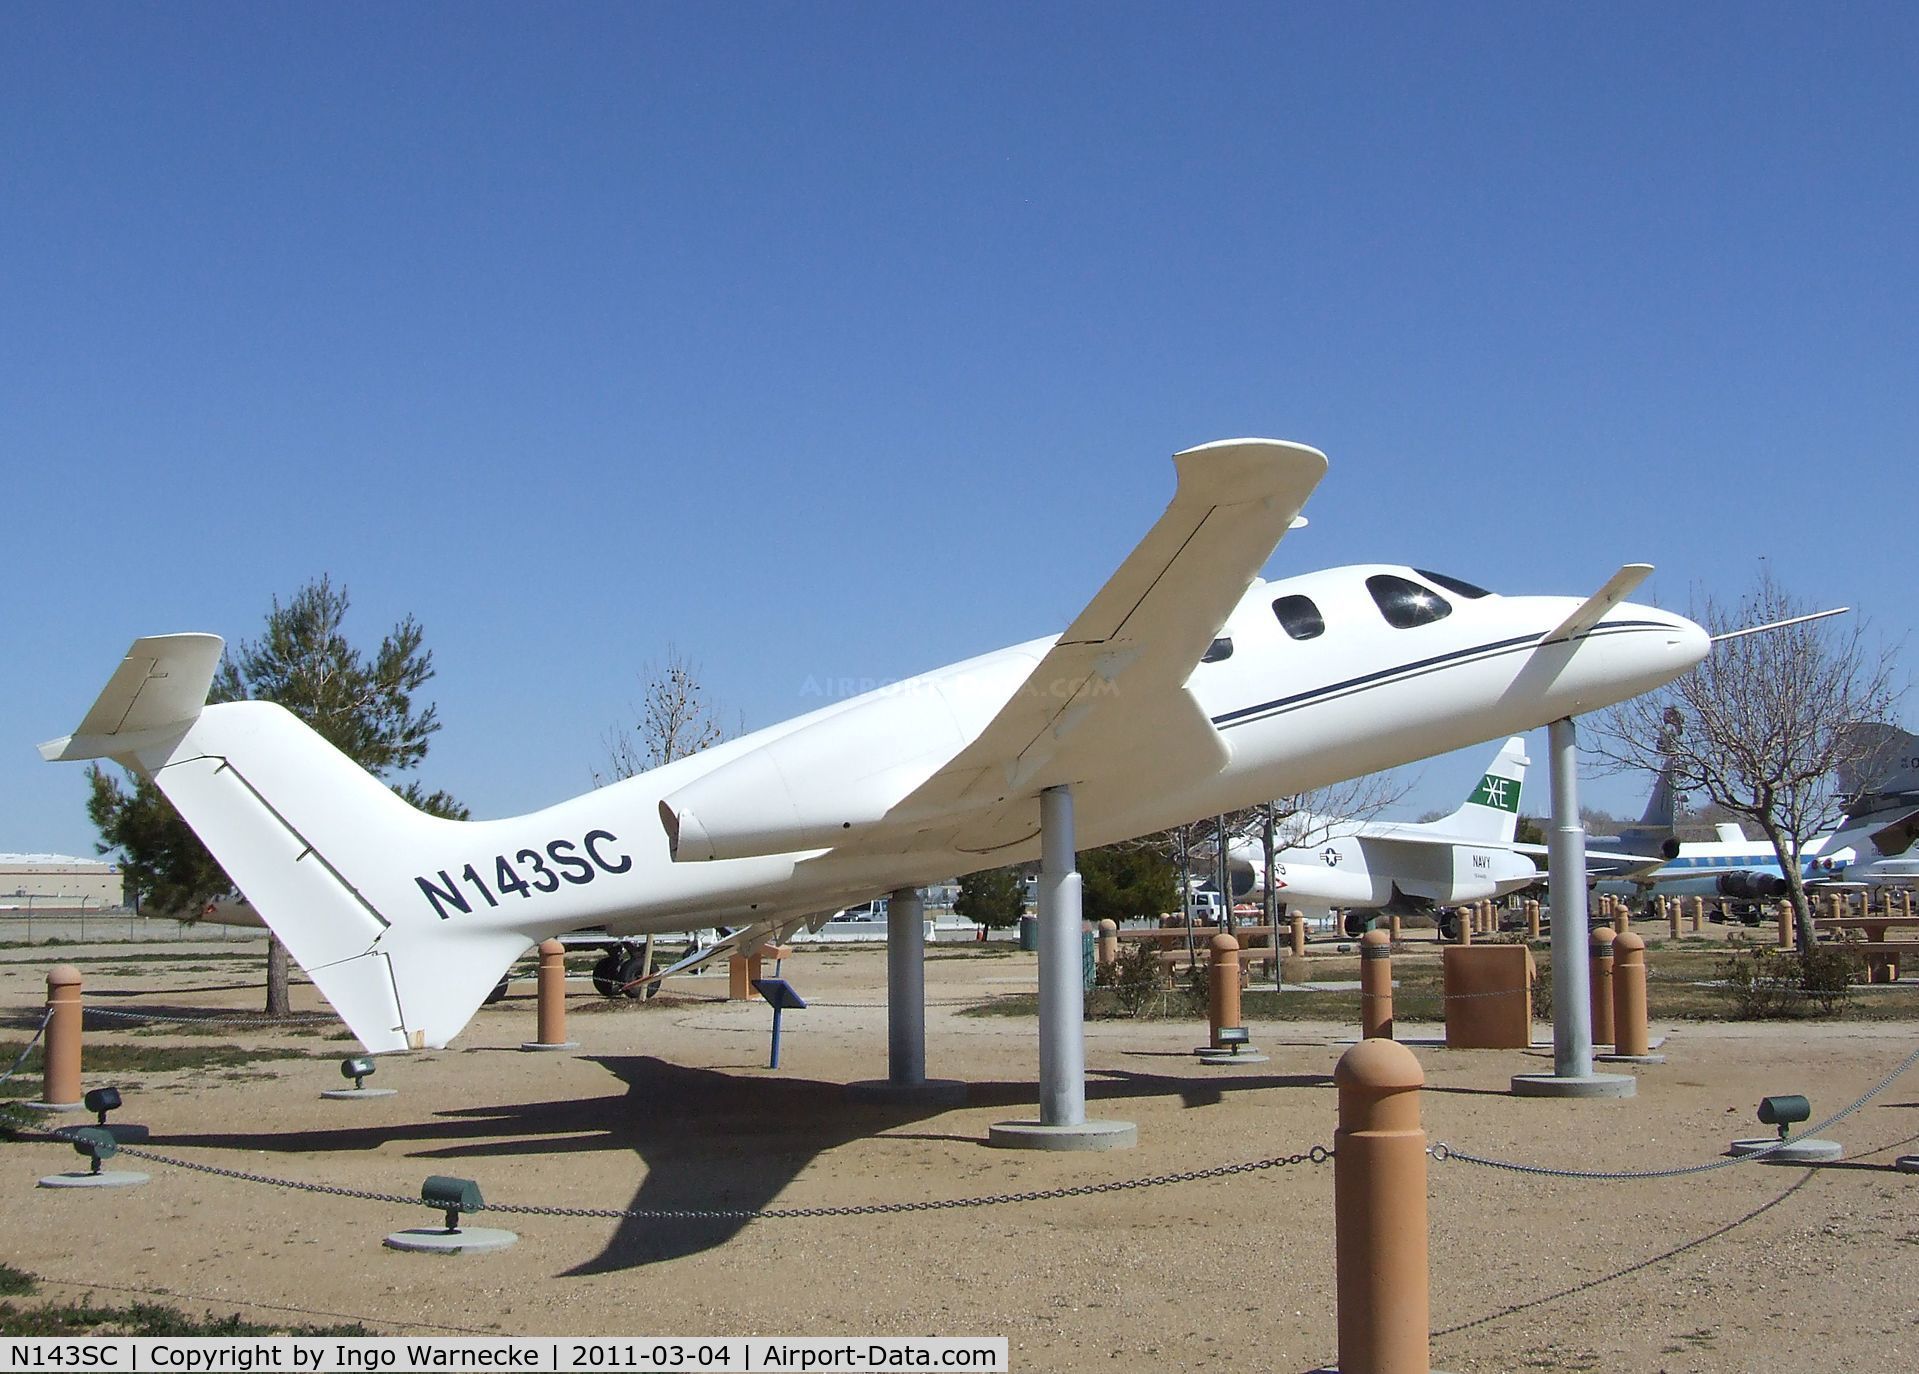 N143SC, Scaled Composites 143 C/N 001, Scaled Composites (Burt Rutan design for Beechcraft) Model 143 Triumph at the Joe Davies Heritage Airpark, Palmdale CA